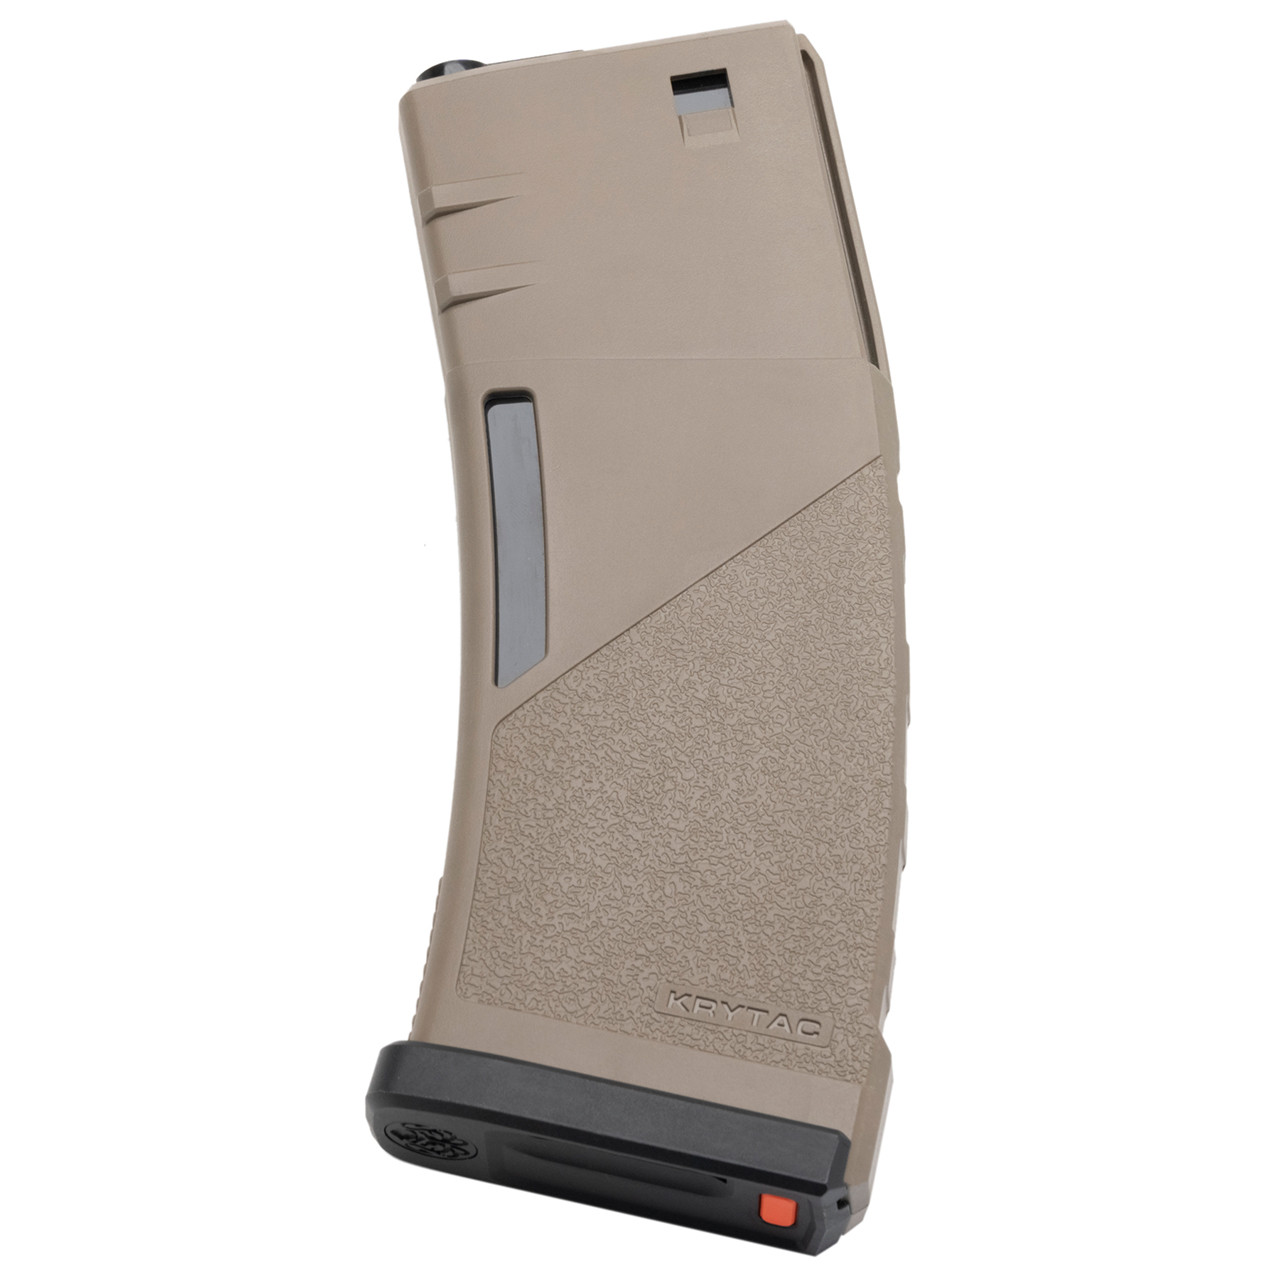 Shop M4 400rd Polymer Hi Capacity Magazine / FDE - $ 33 - Krytac.com | For Airsoft Use Only.